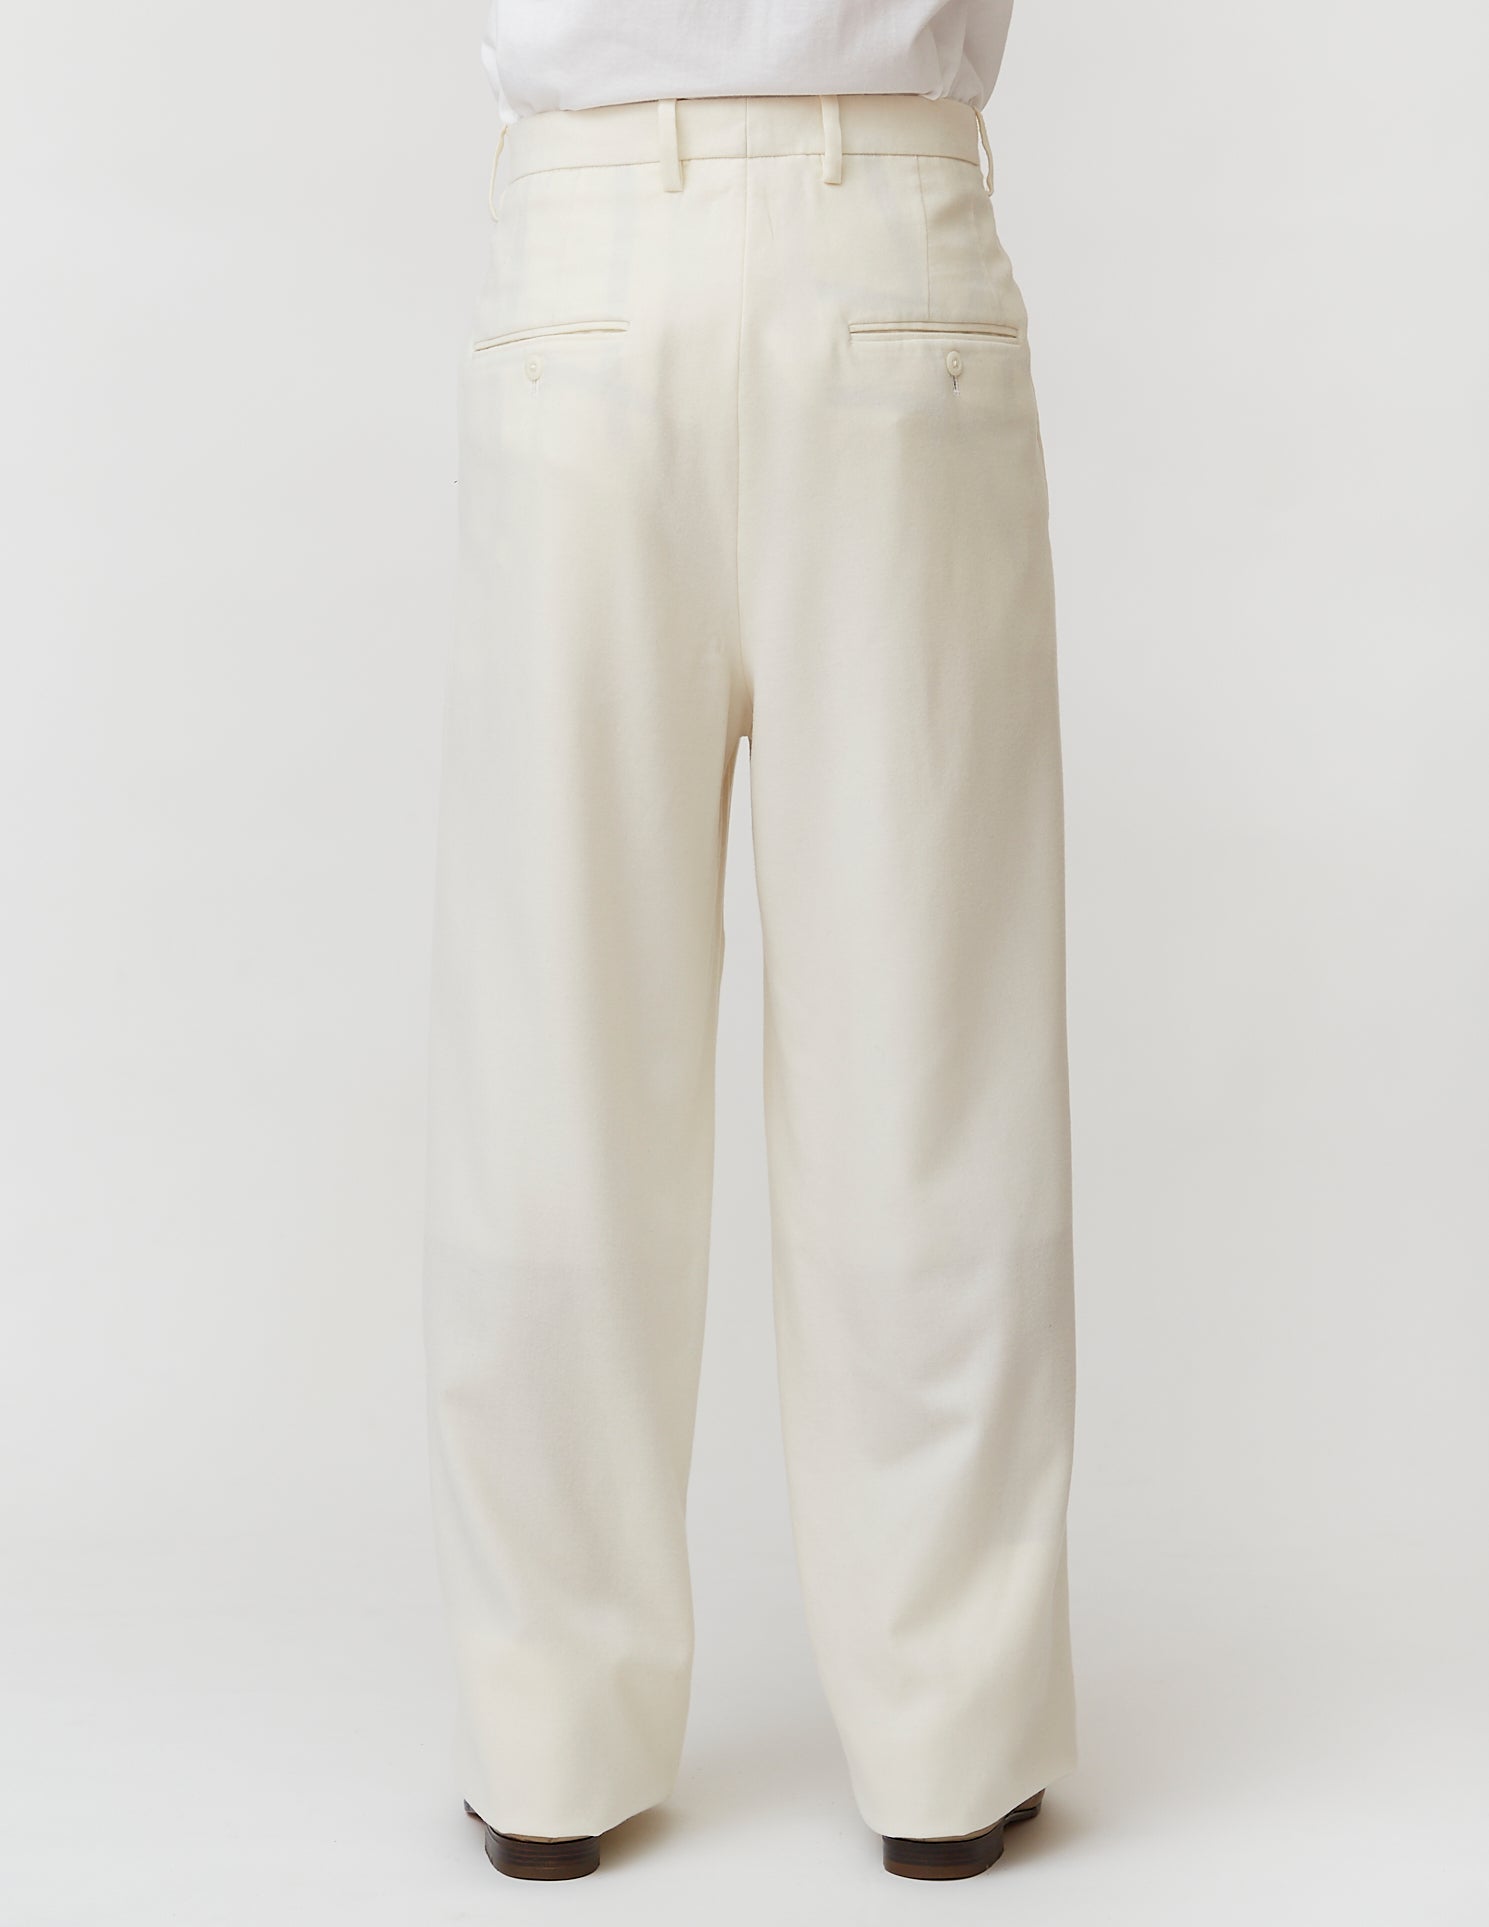 TUCKED WIDE PANTS off white